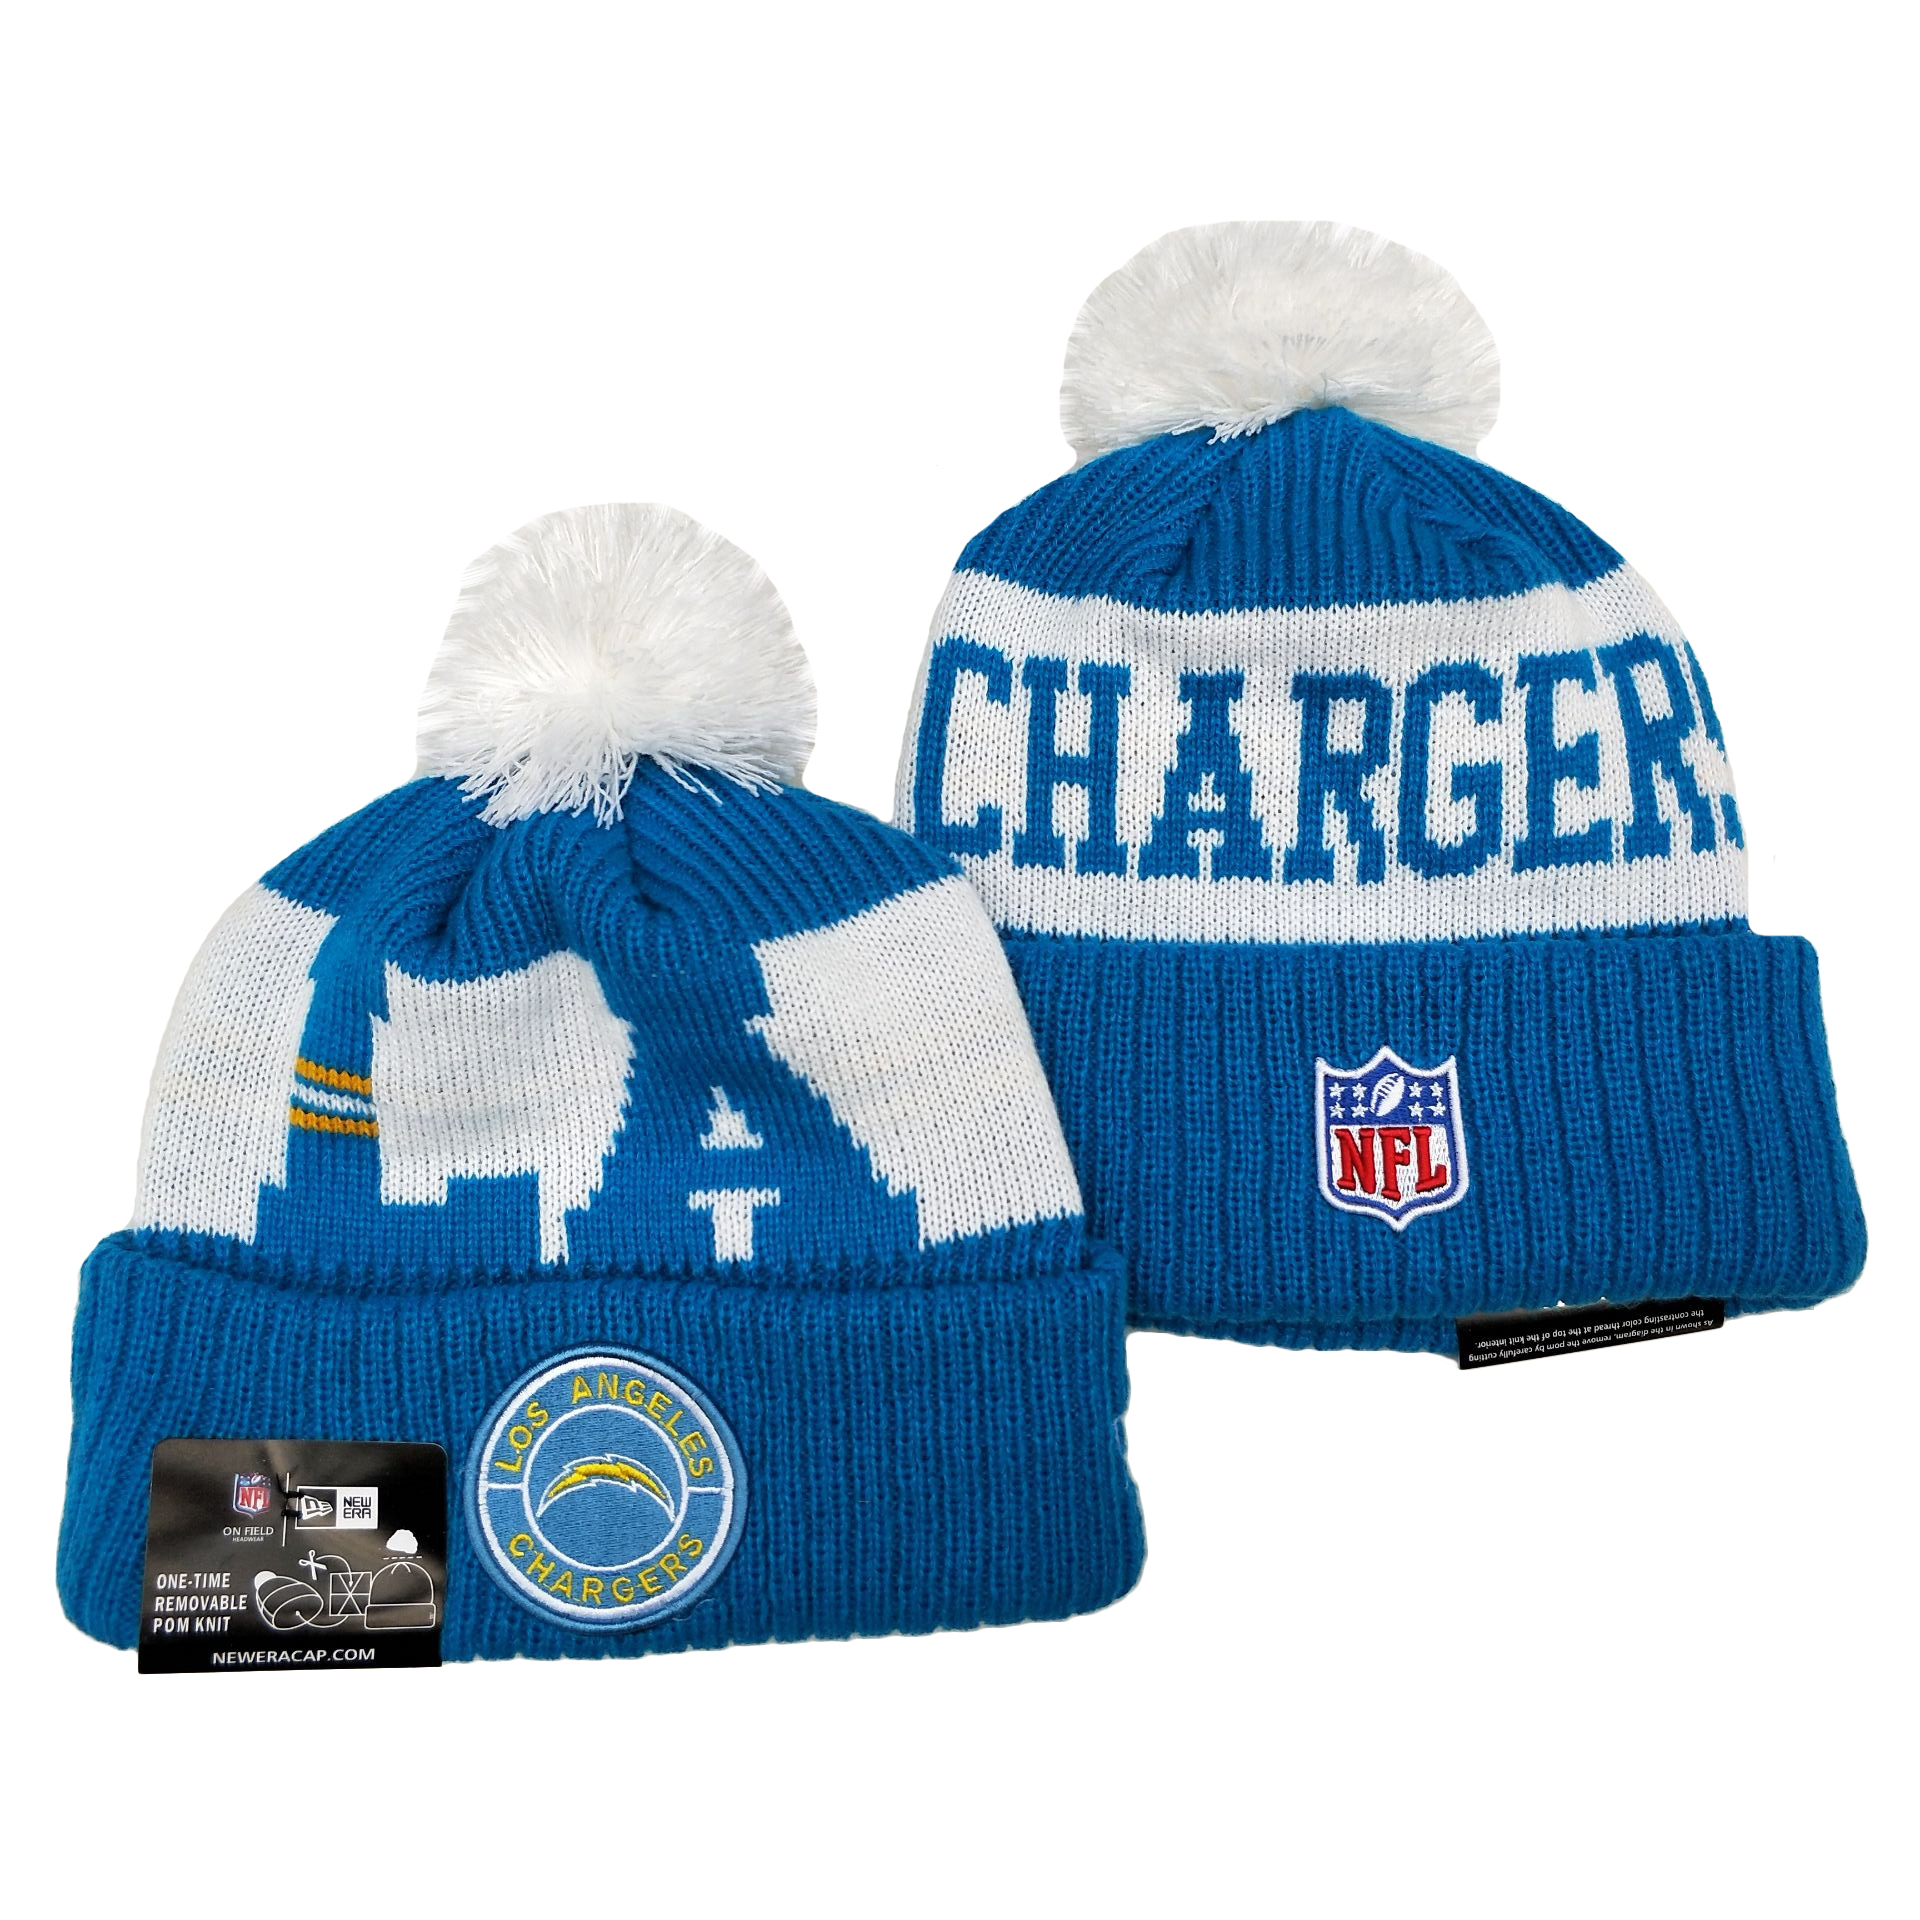 Los Angeles Chargers Knit Hats 036